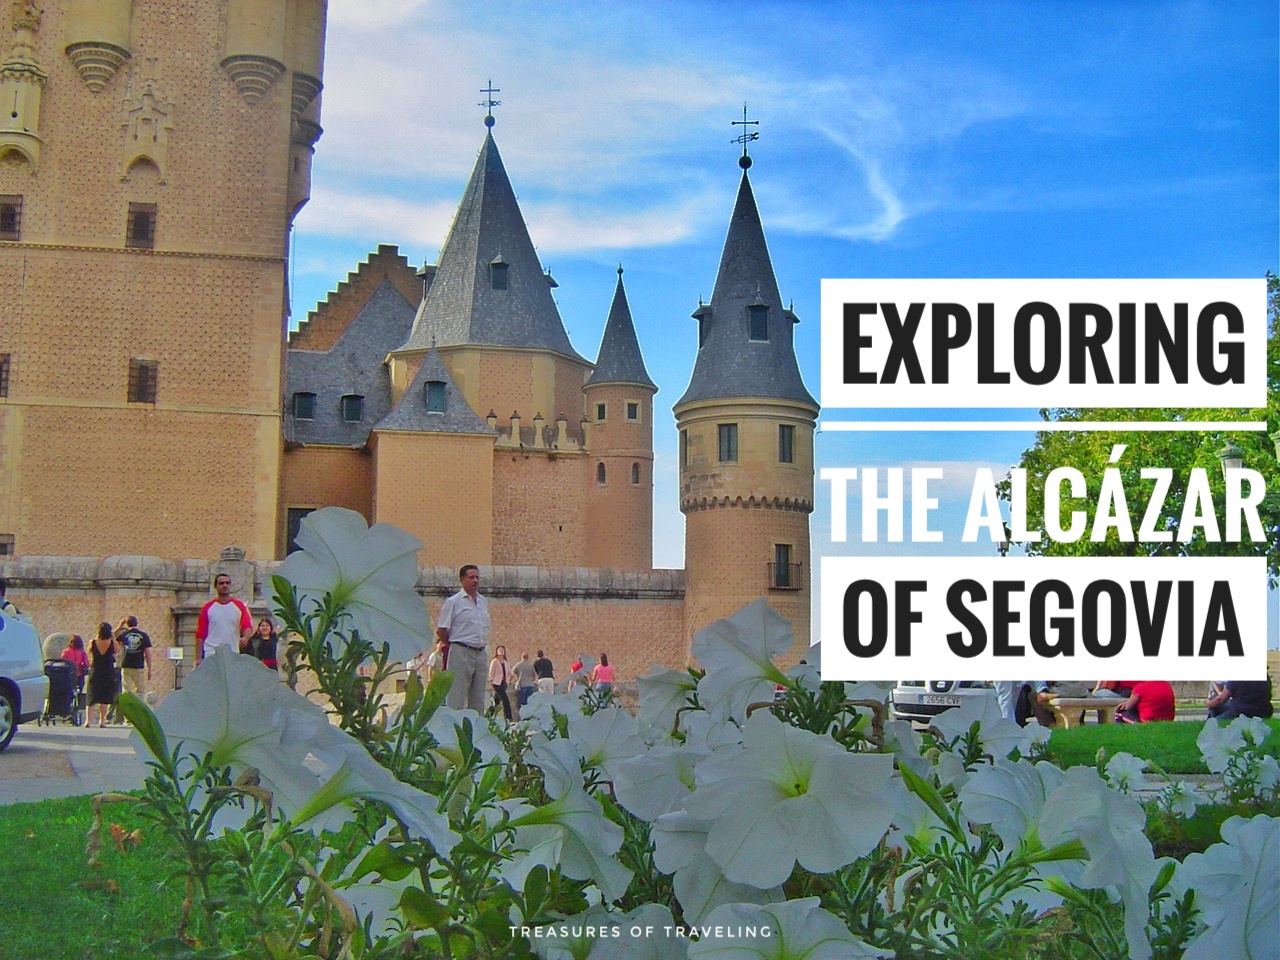 Come explore the Alcazar of Segovia! Not only is it a UNESCO World Heritage Site, but it was also one of the European castles that inspired Walt Disney’s Cinderella Castle. It is one of the many stunning treasures of traveling to see in the charming Spanish city of Segovia.